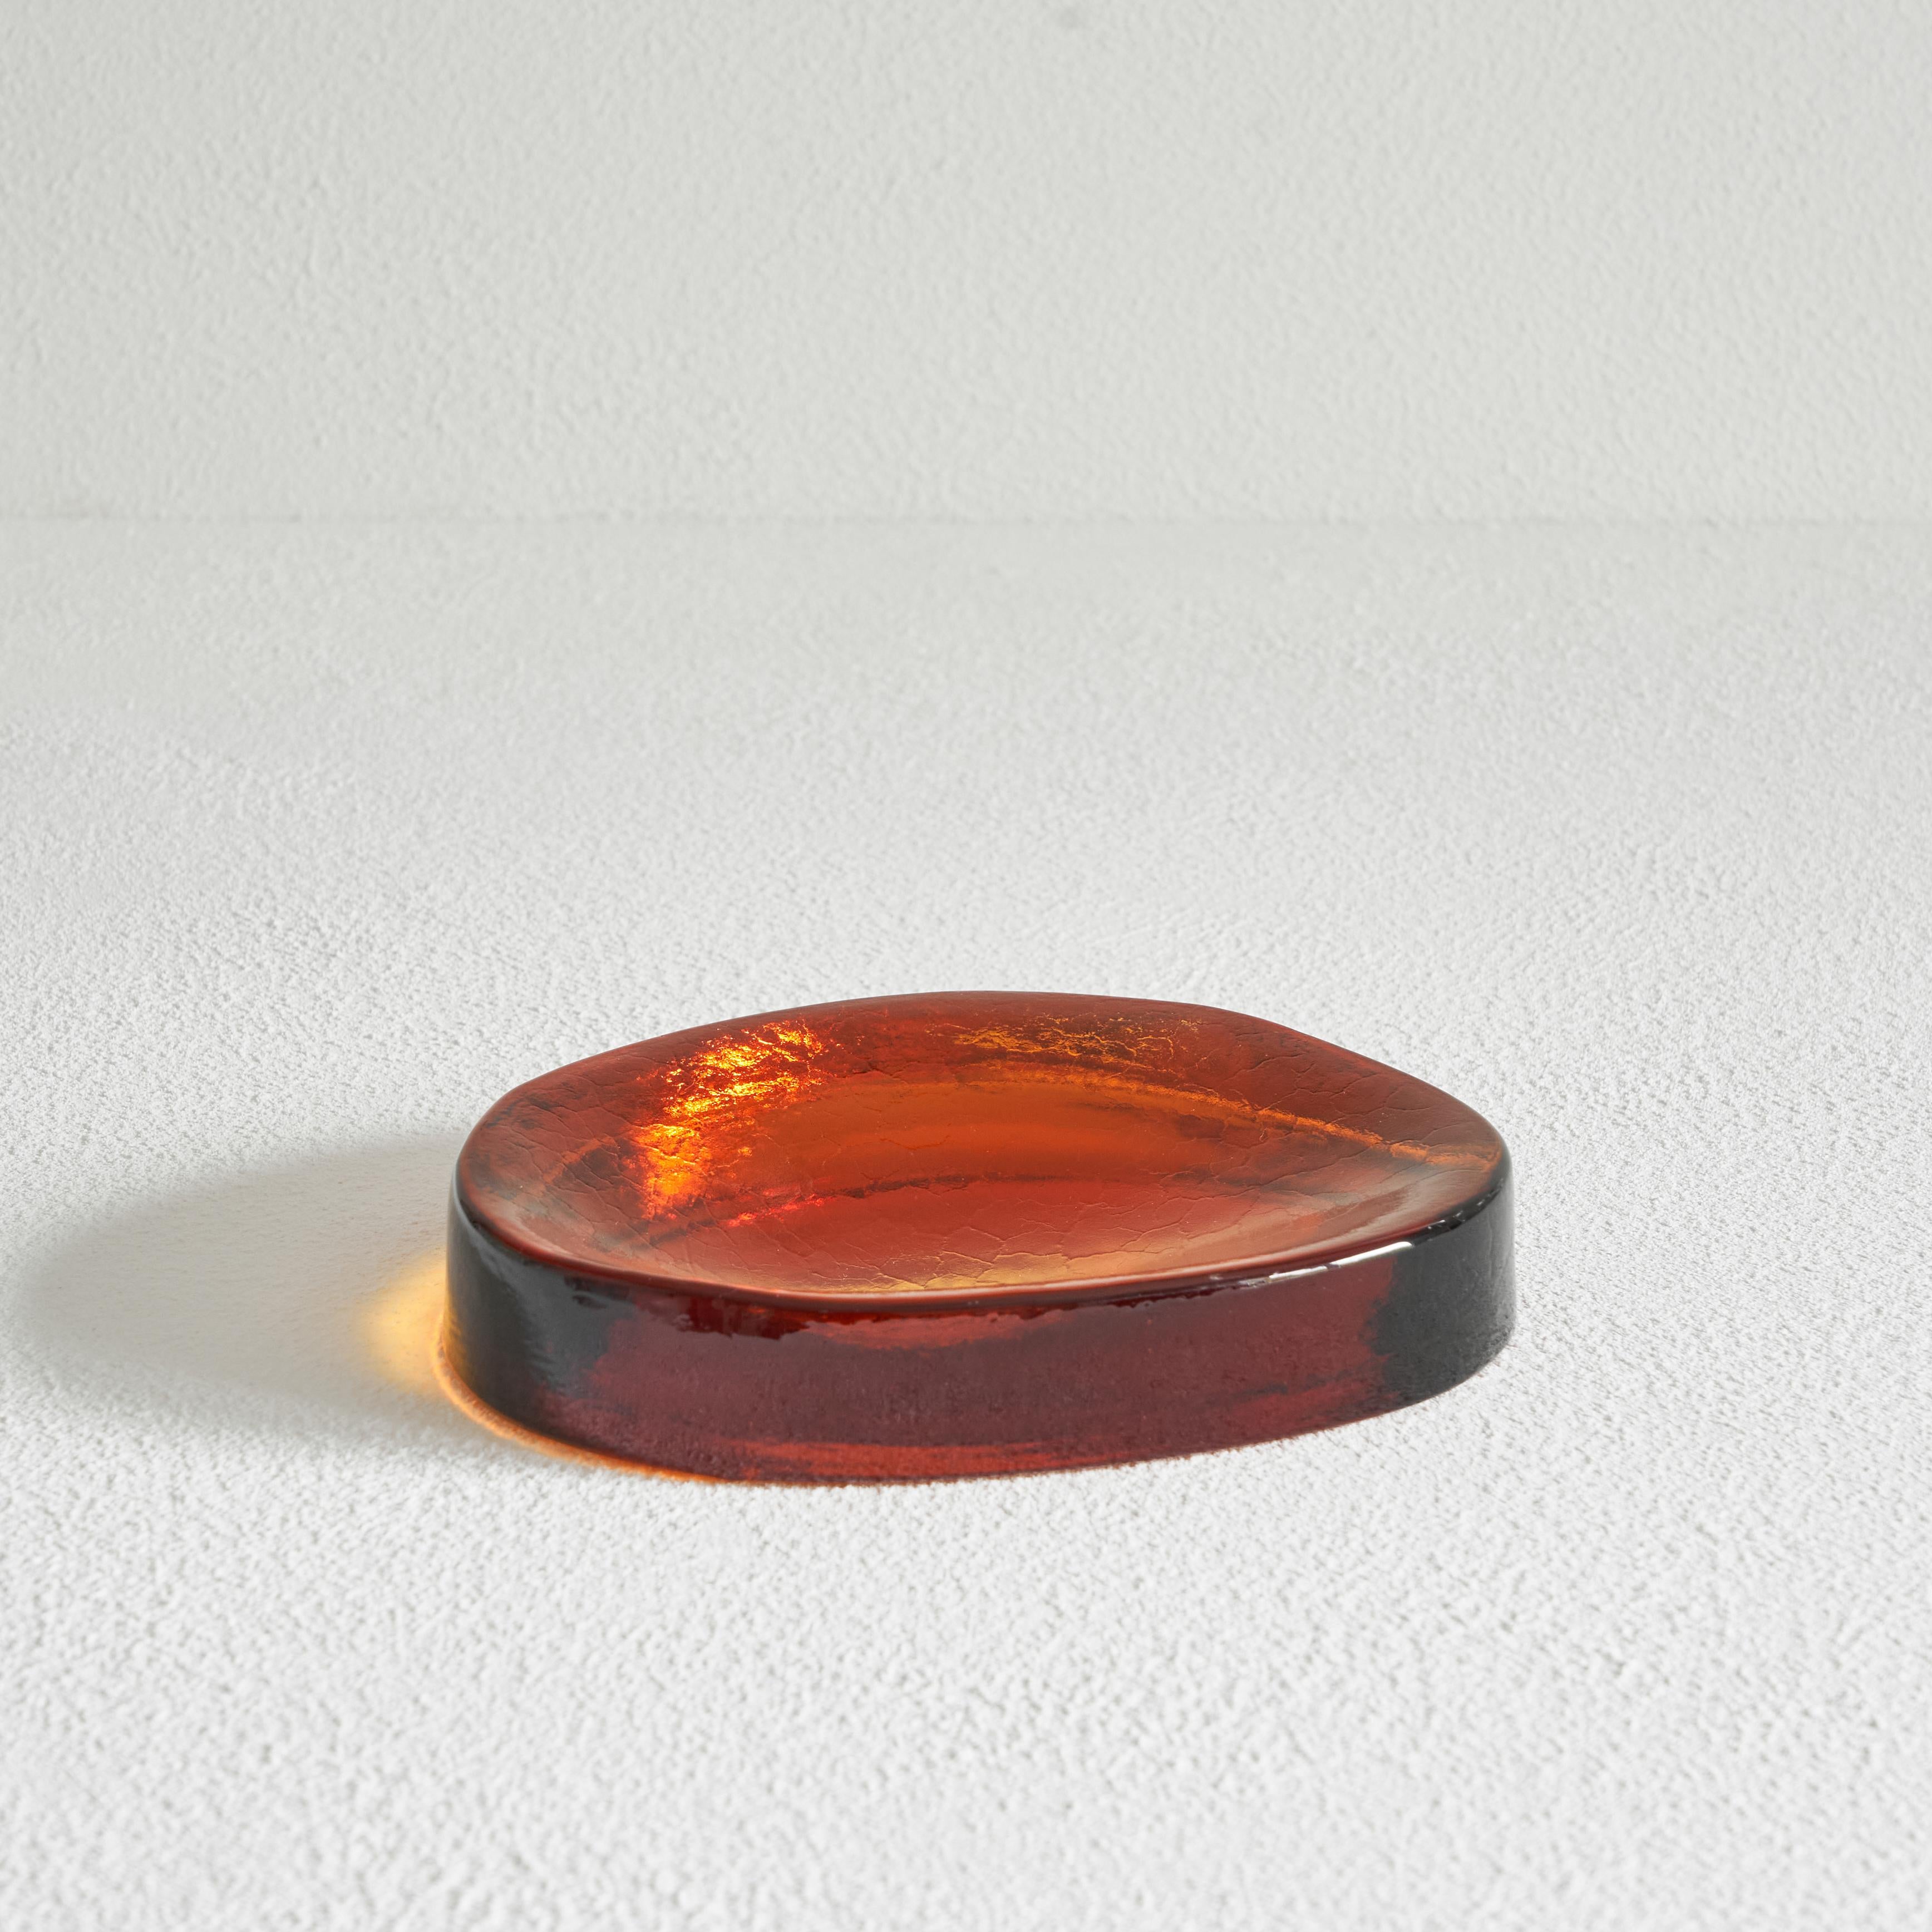 Freeform Concave Amber Colored Vide Poche in Solid Glass, 1960s.

Wonderful freeform shaped bowl or vide poche in amber colored solid glass. A real gem with a very deep and mesmerizing color. The solid glass has a very attractive concave freeform